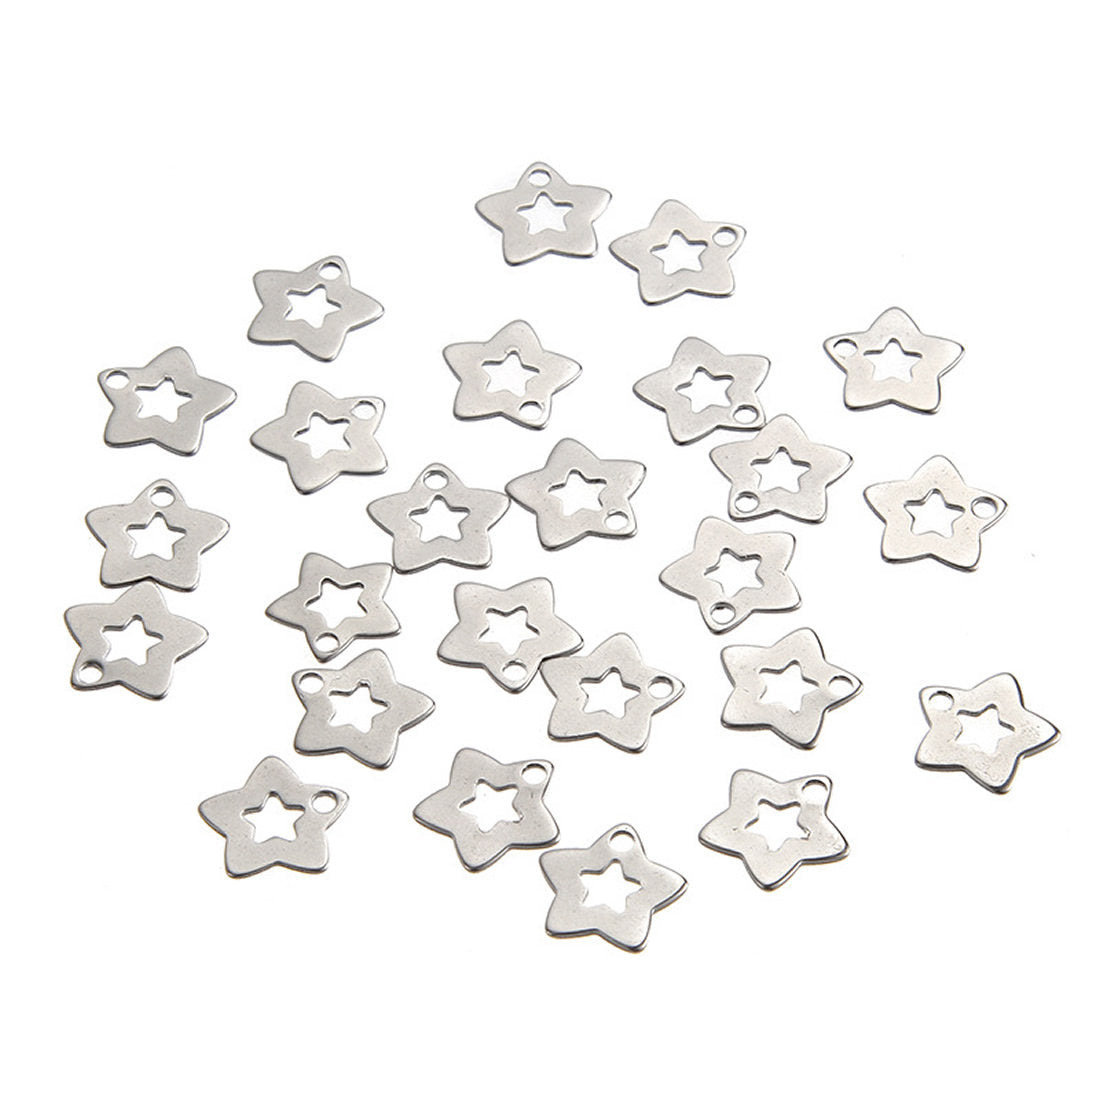 12mm star charms stainless steel hypoallergenic charms 10pcs